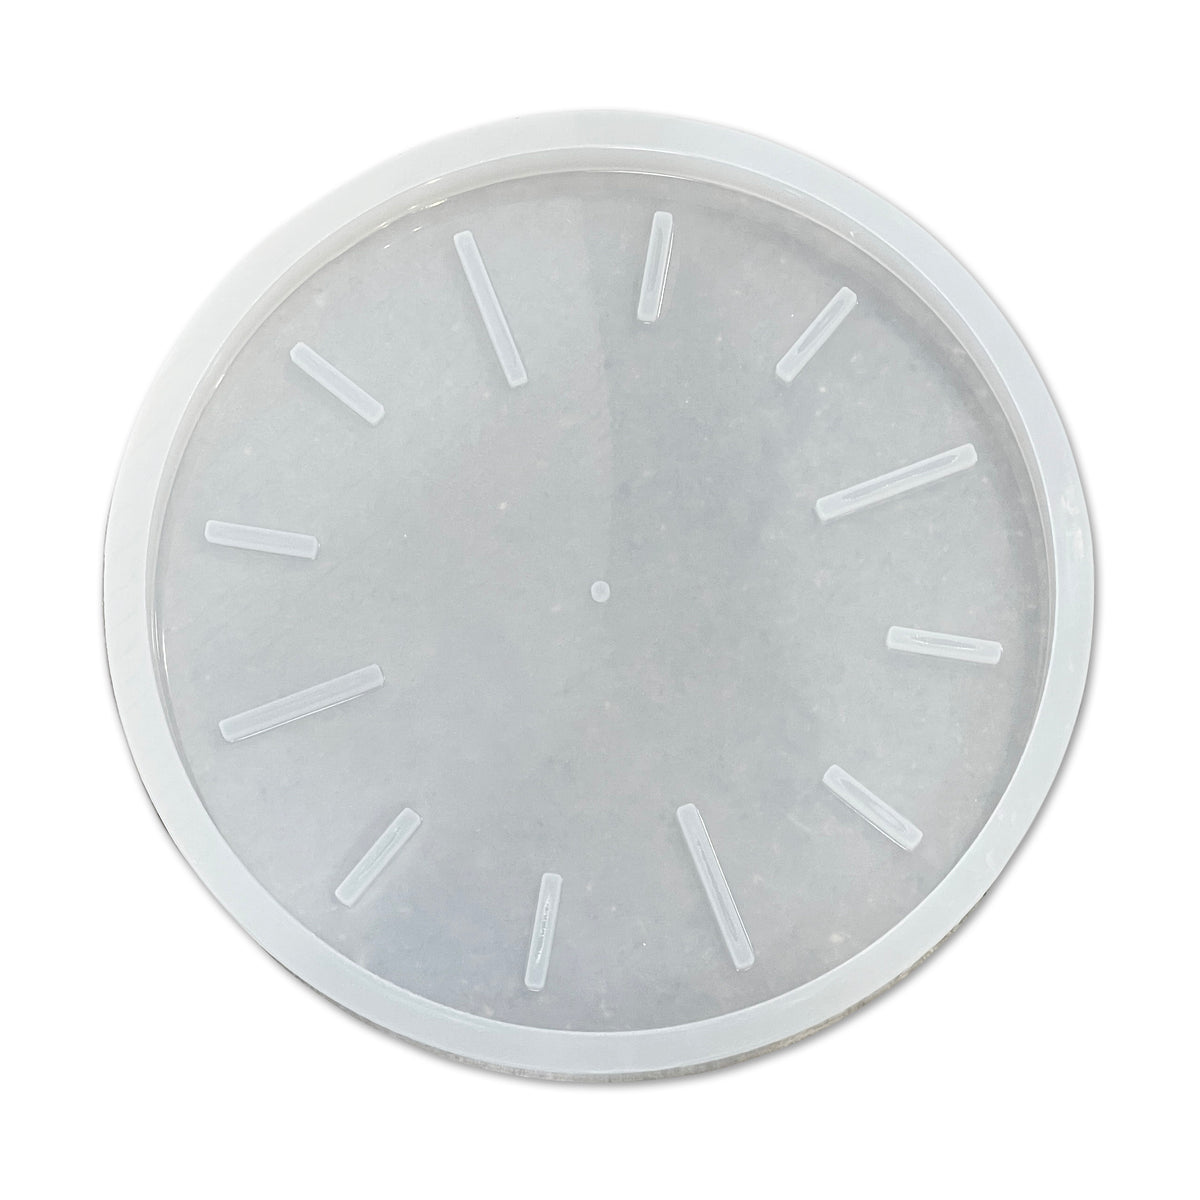 Up To 86% Off on Silicone Clock Epoxy Resin Mo